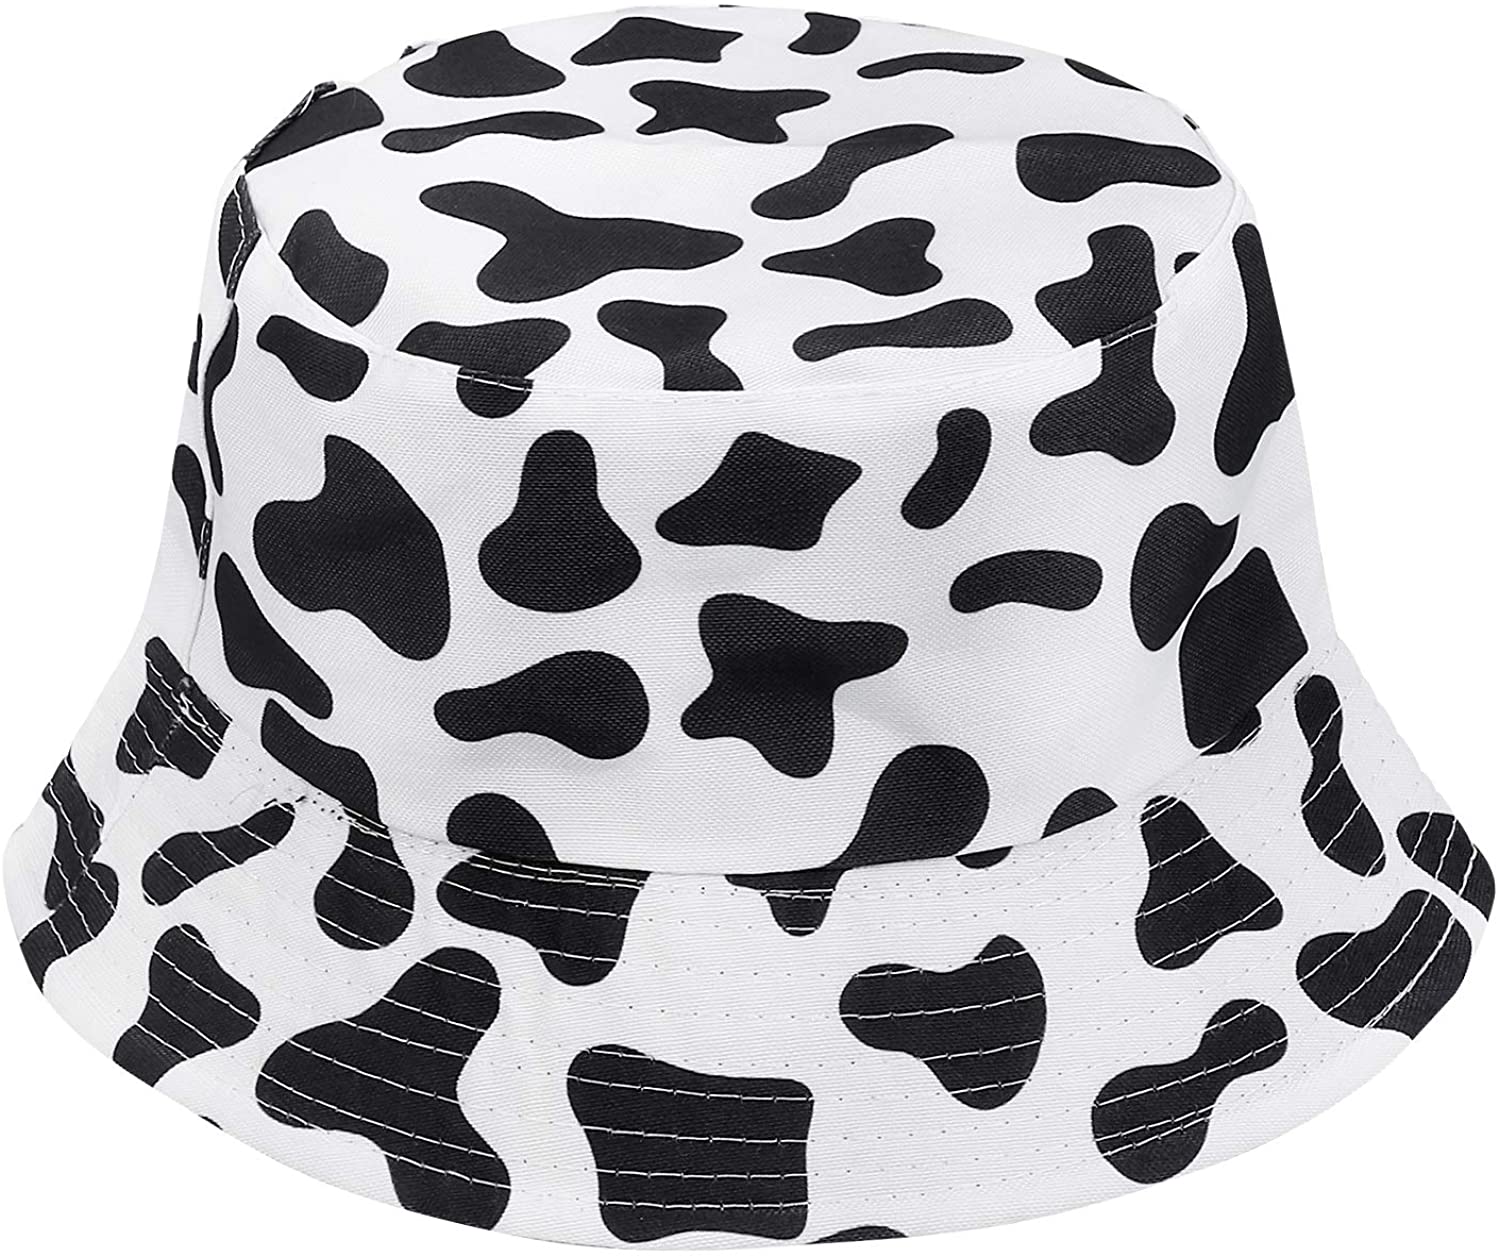 KESYOO Unisex Bucket Hat Cow Pattern Double-Side-Wear Reversible Summer Outdoor Cap Fisherman Cap UV Protection Hat for Hiking Beach Sports Supplies